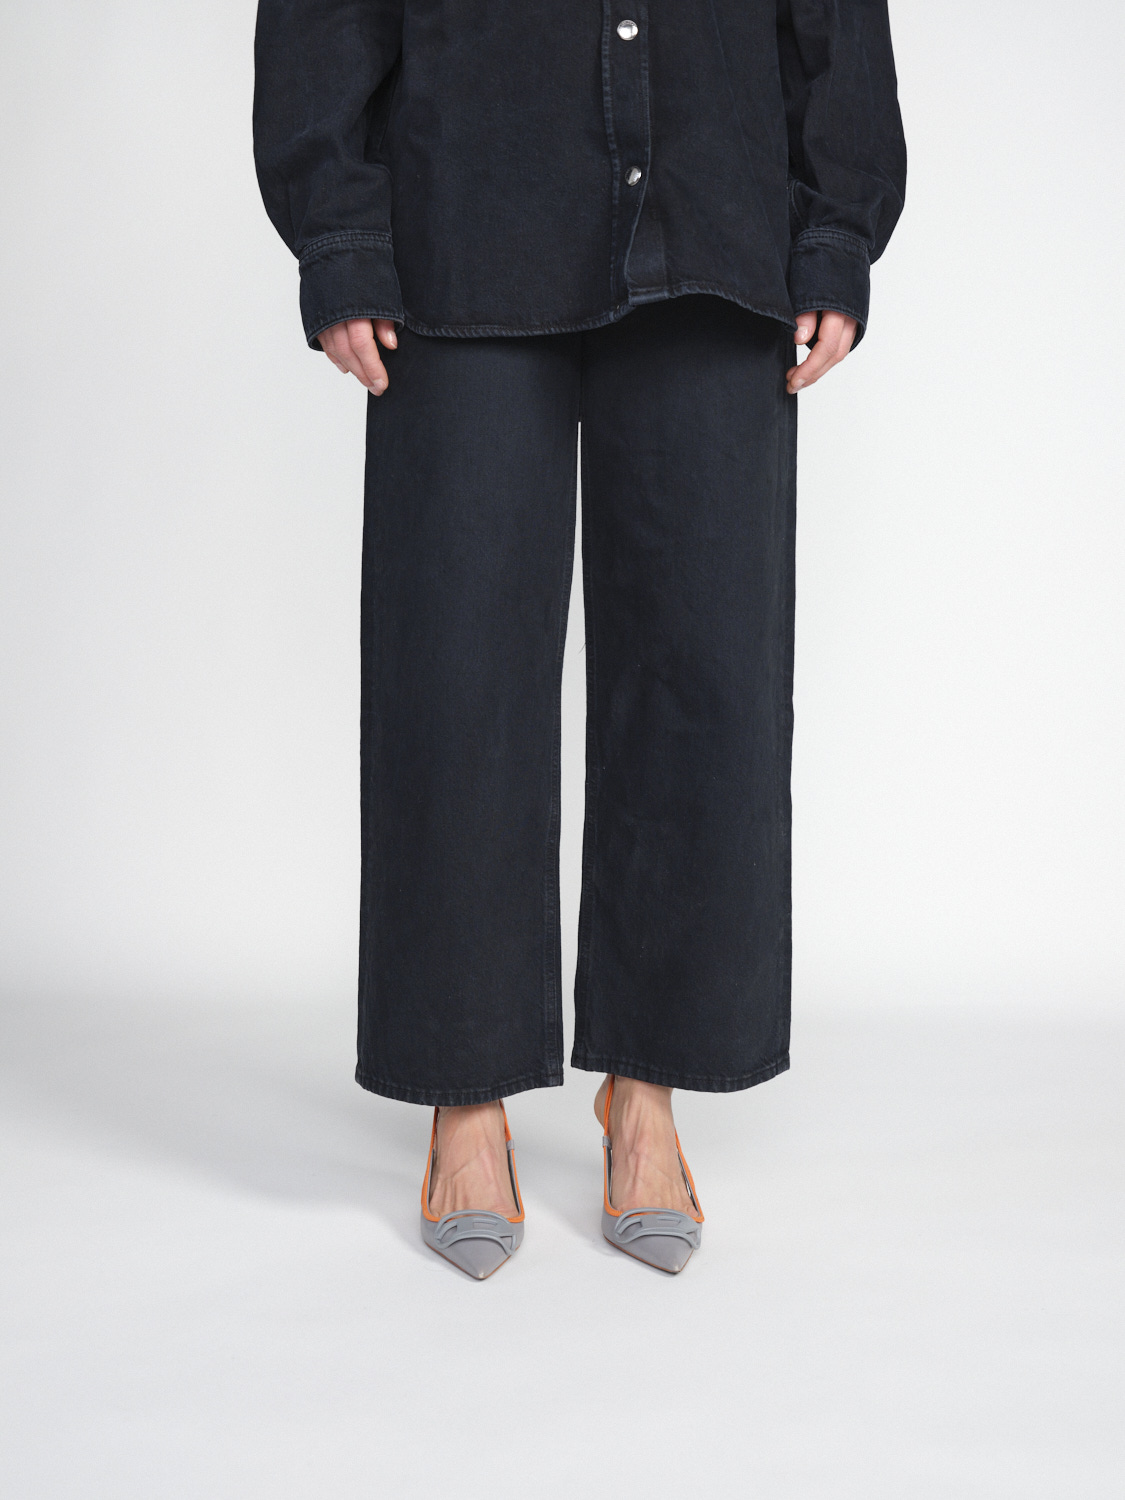 Agolde Ren - Mom jeans with cropped length  black 26